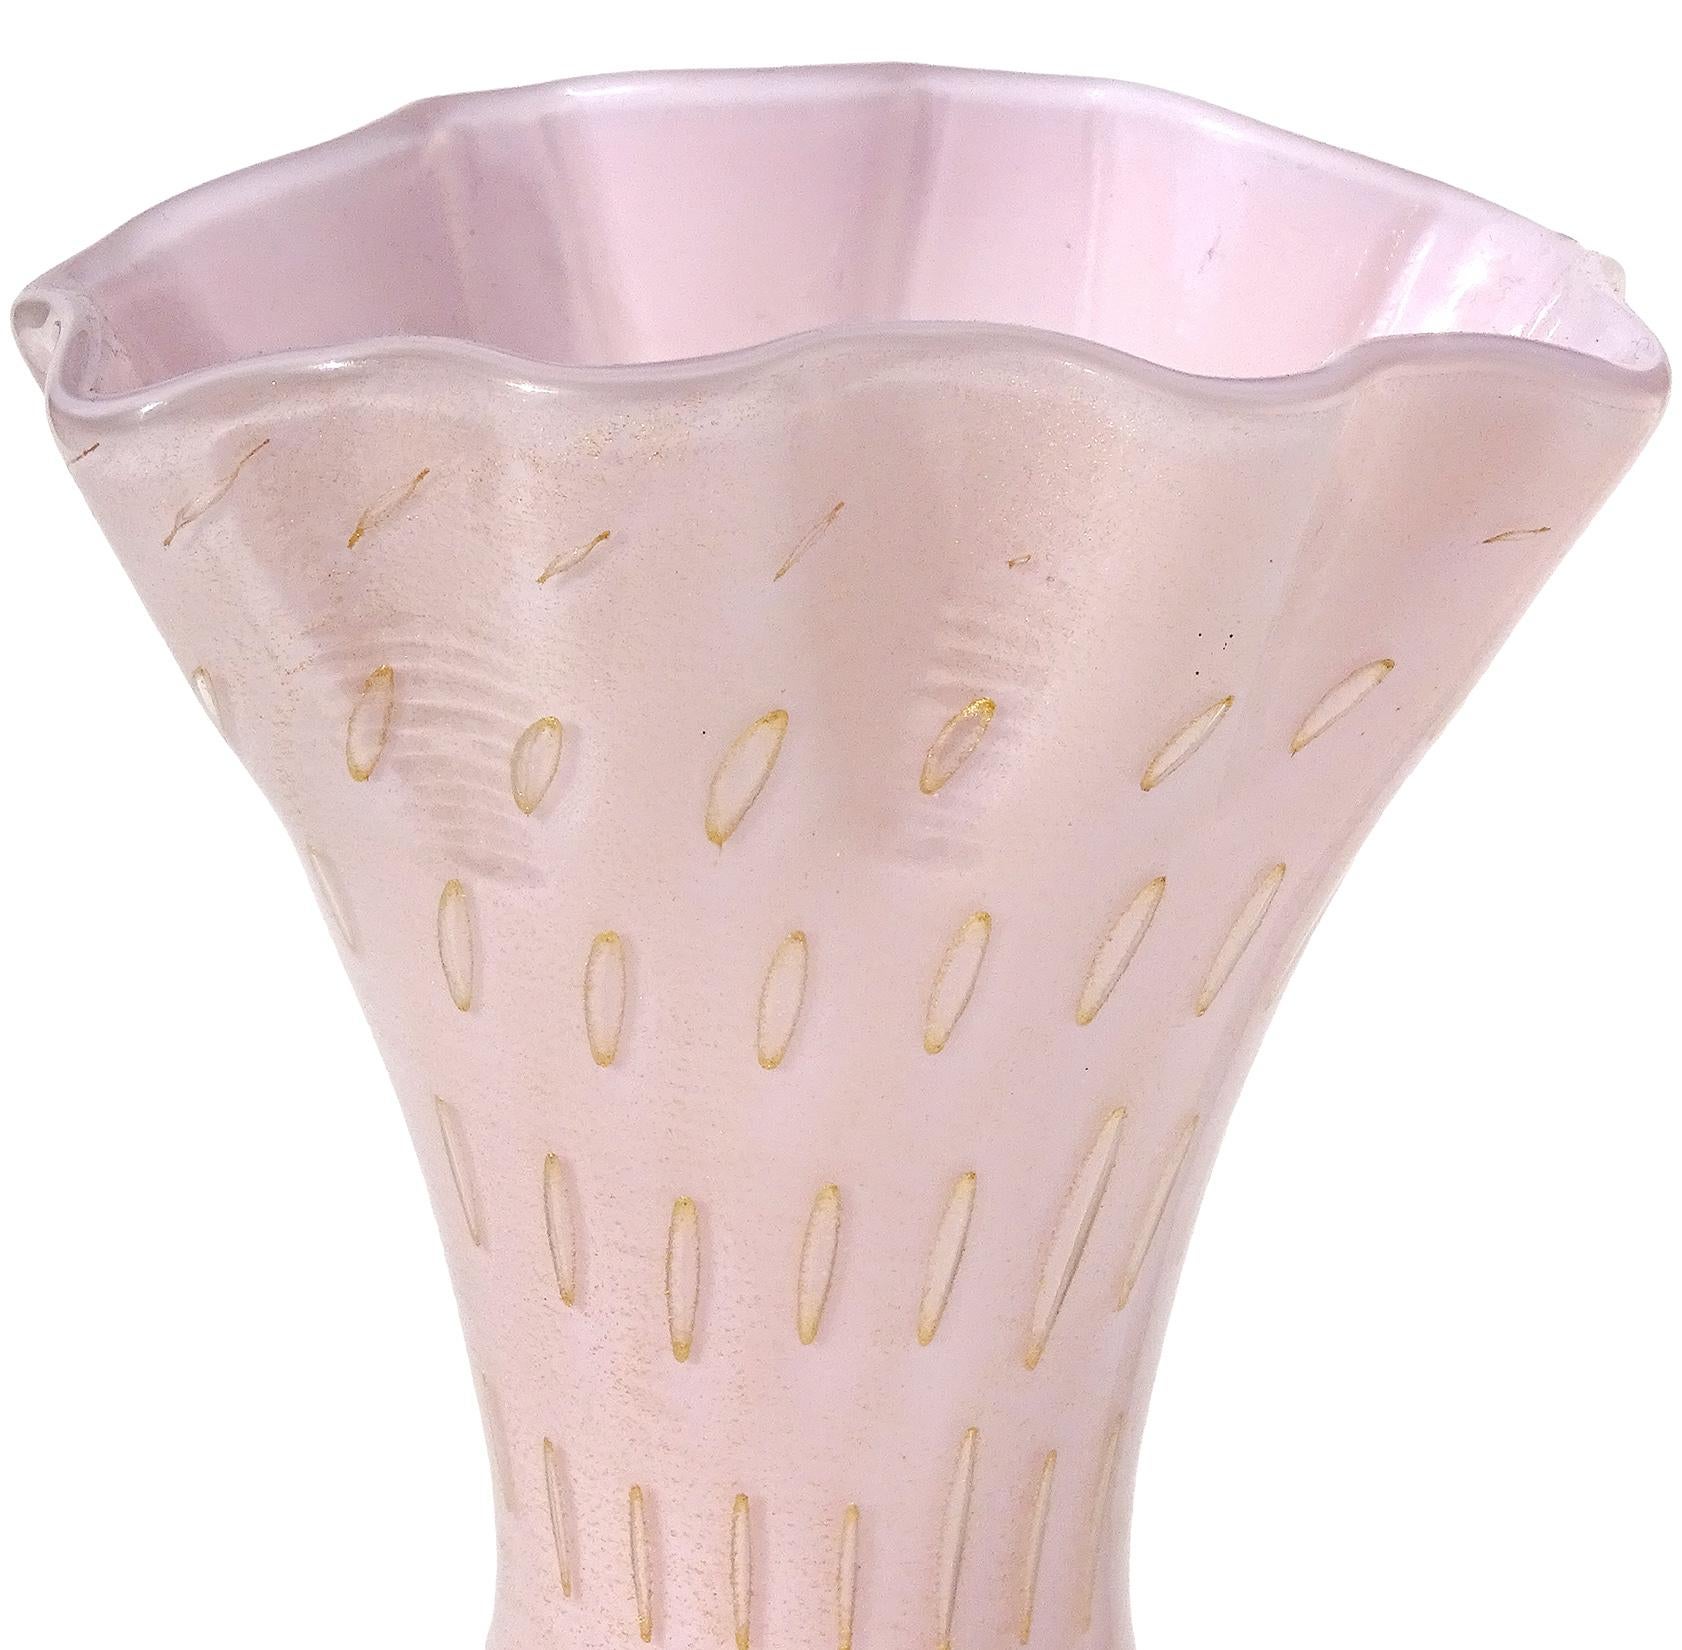 Beautiful vintage Murano hand blown pink, controlled bubbles and gold flecks Italian art glass flower vase. Documented to designer Alfredo Barbini. The gold leaf gathers around each bubble, making them really stand out. The rim is crimped and